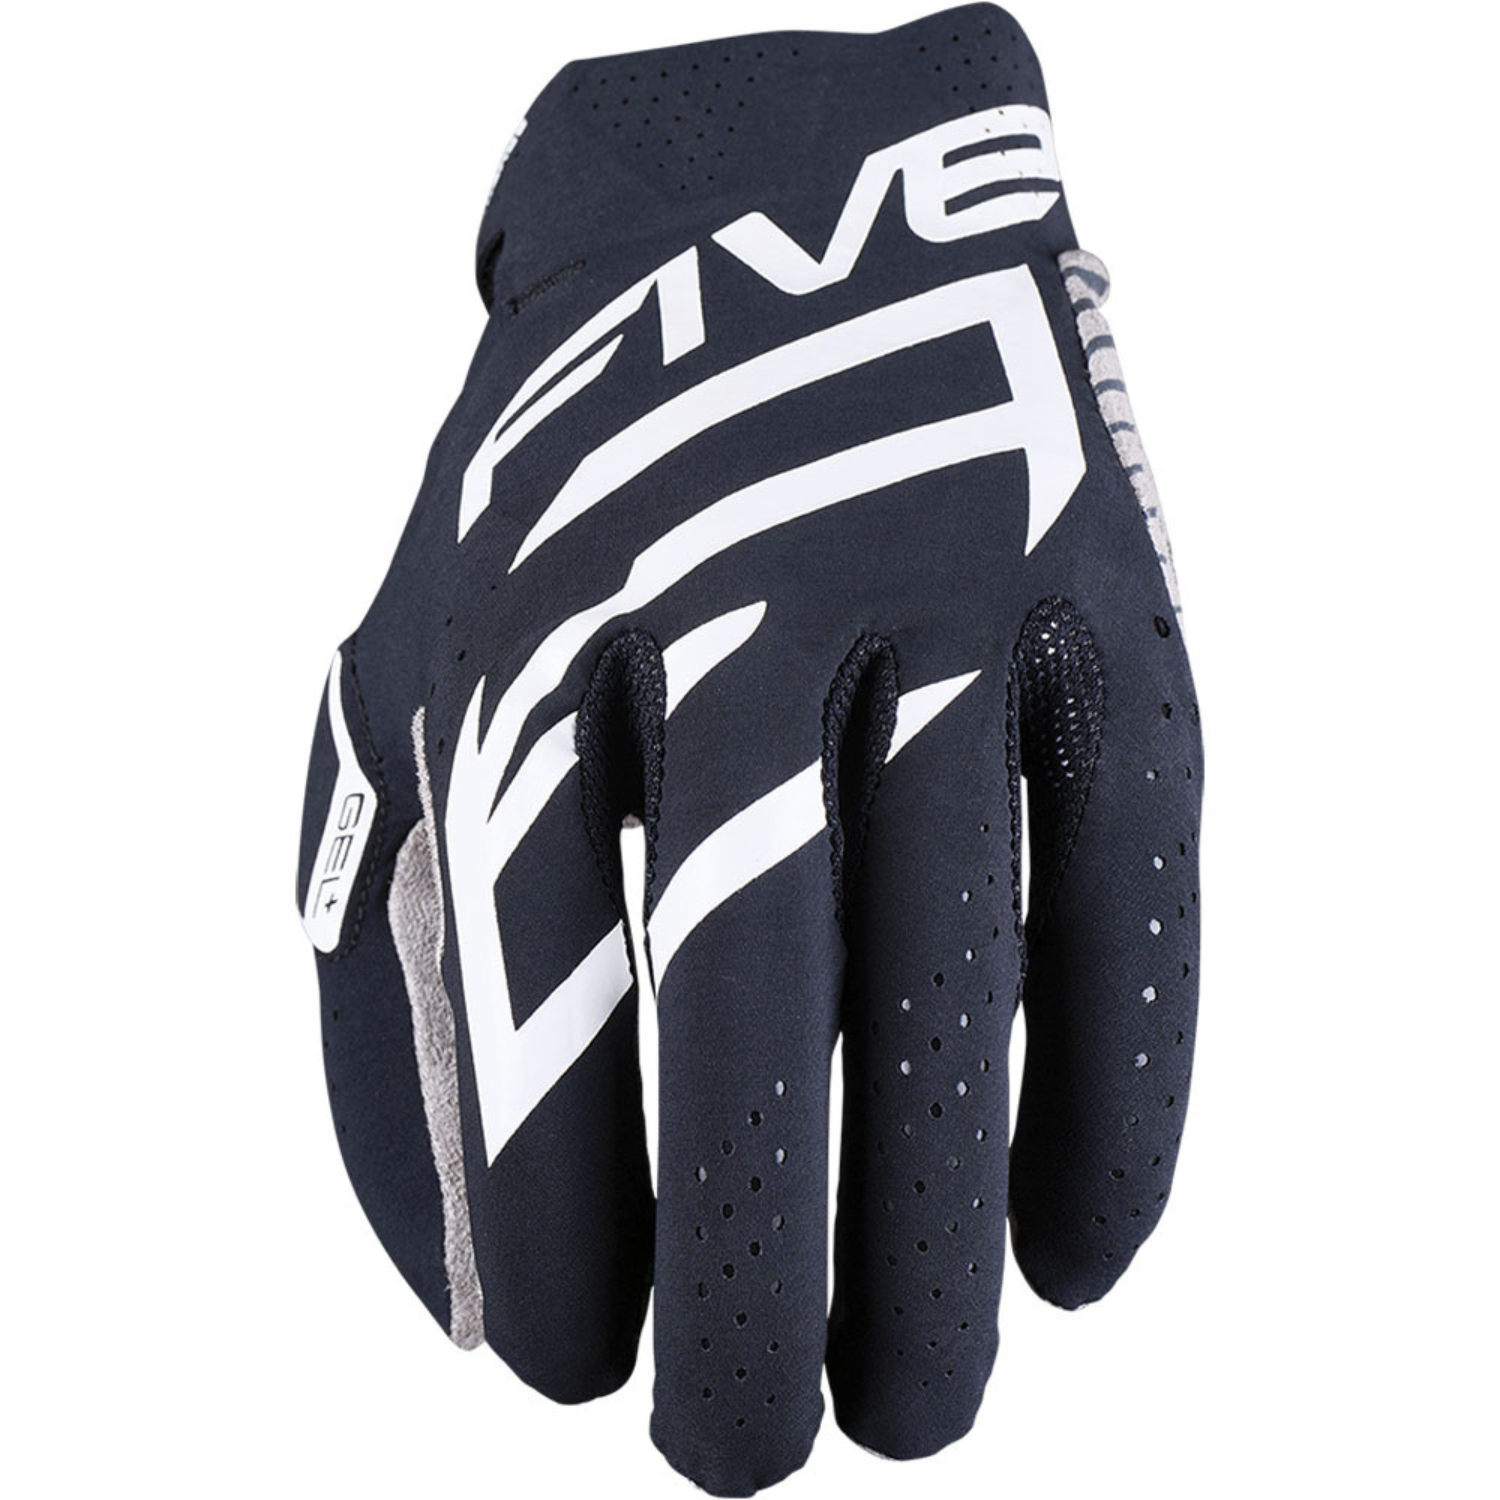 Image of Five MXF Race Gloves Black White Size 2XL ID 3841300111853